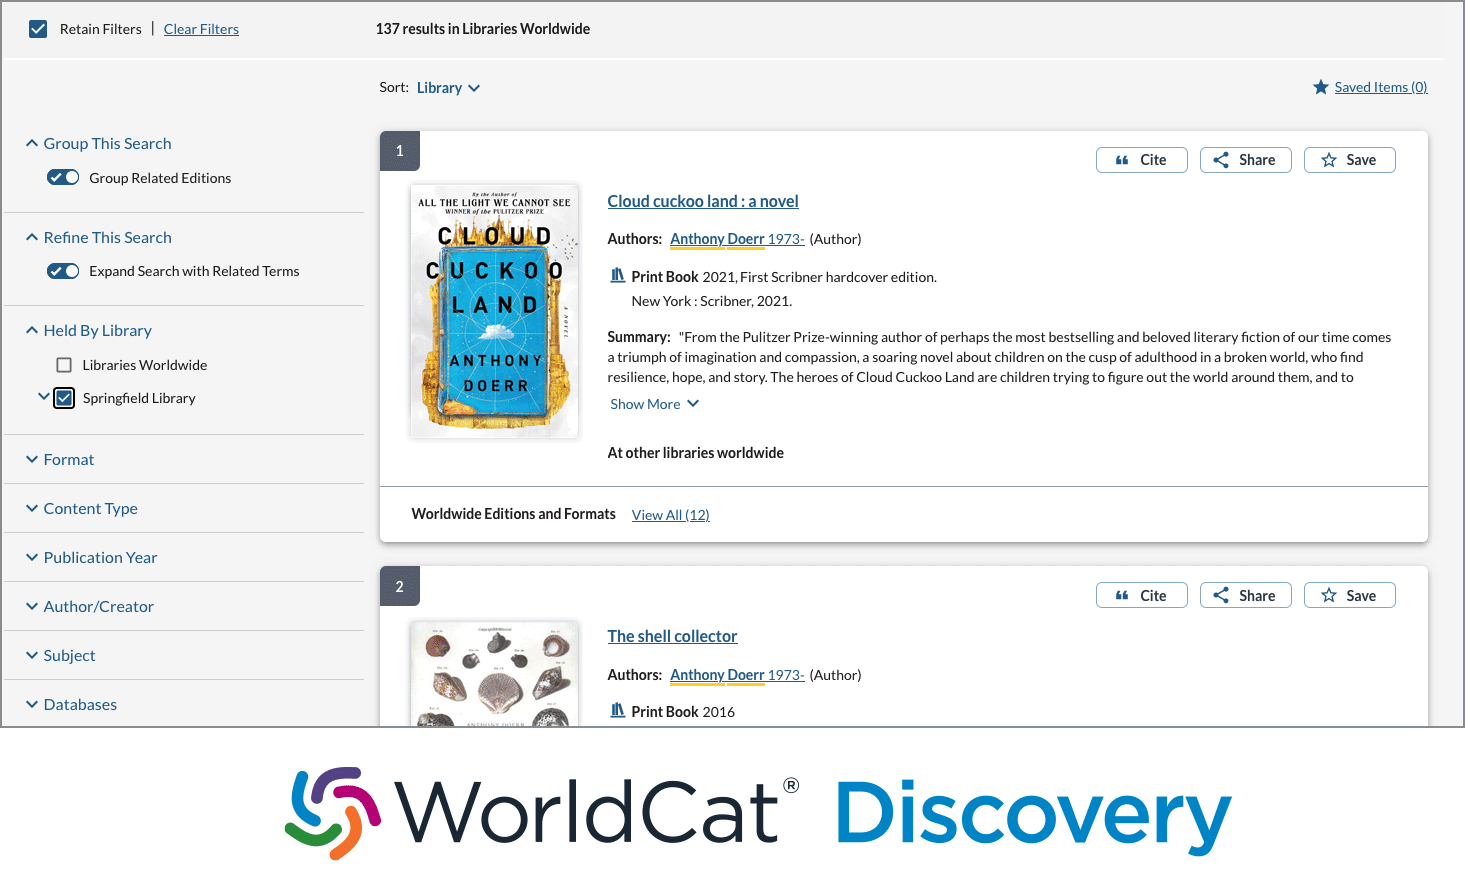 Illustration: WorldCat Discovery revised interface